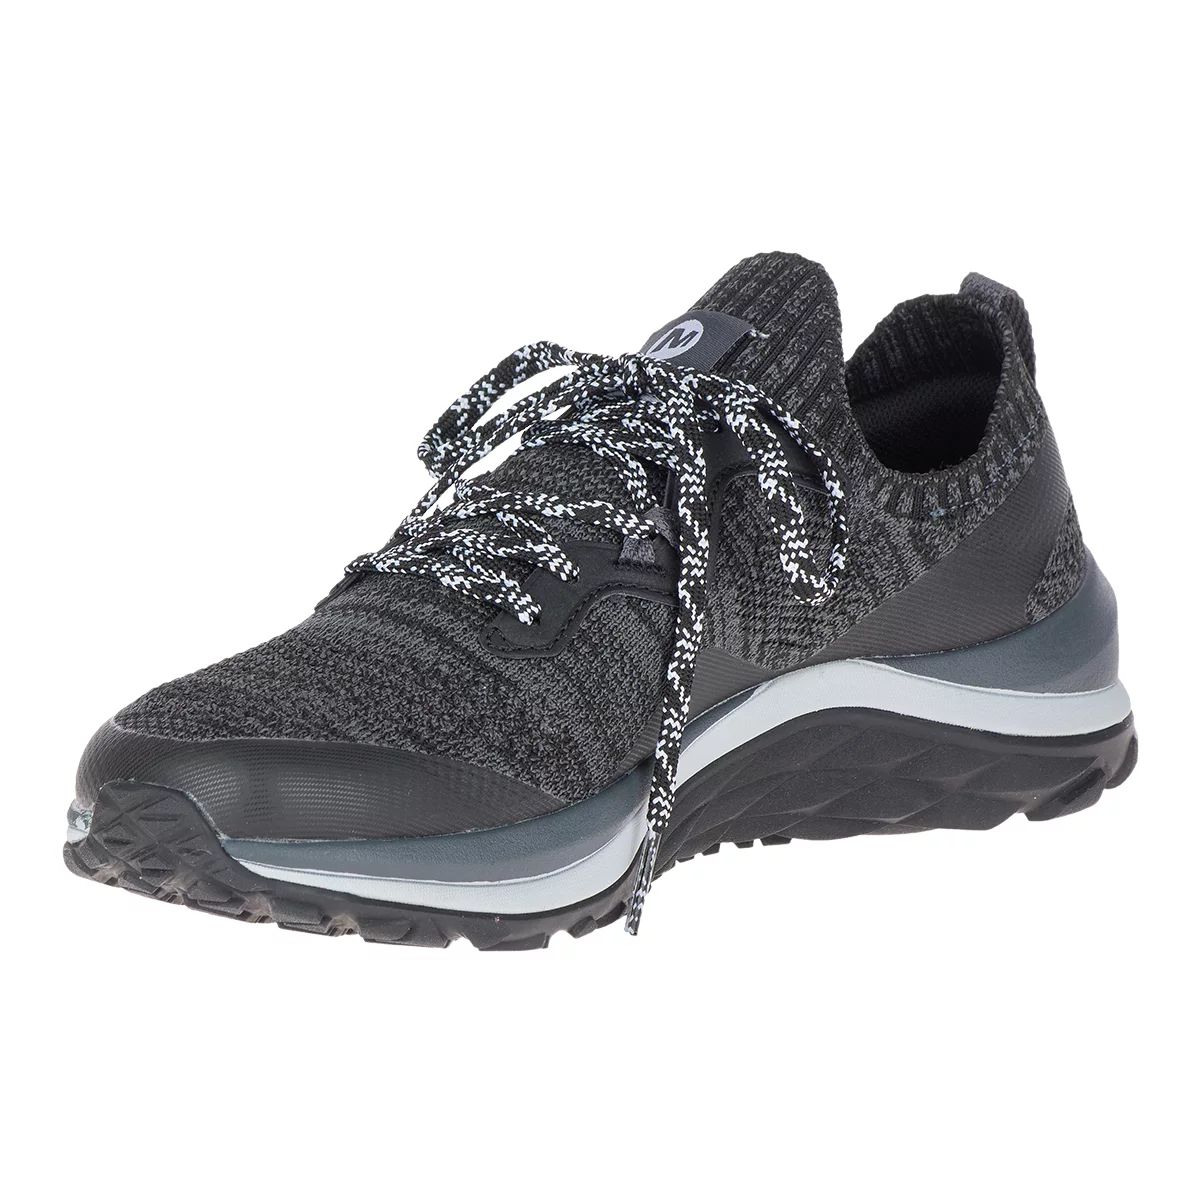 Merrell Women's Mag-9 Knit Comfortable Trail Running Shoes